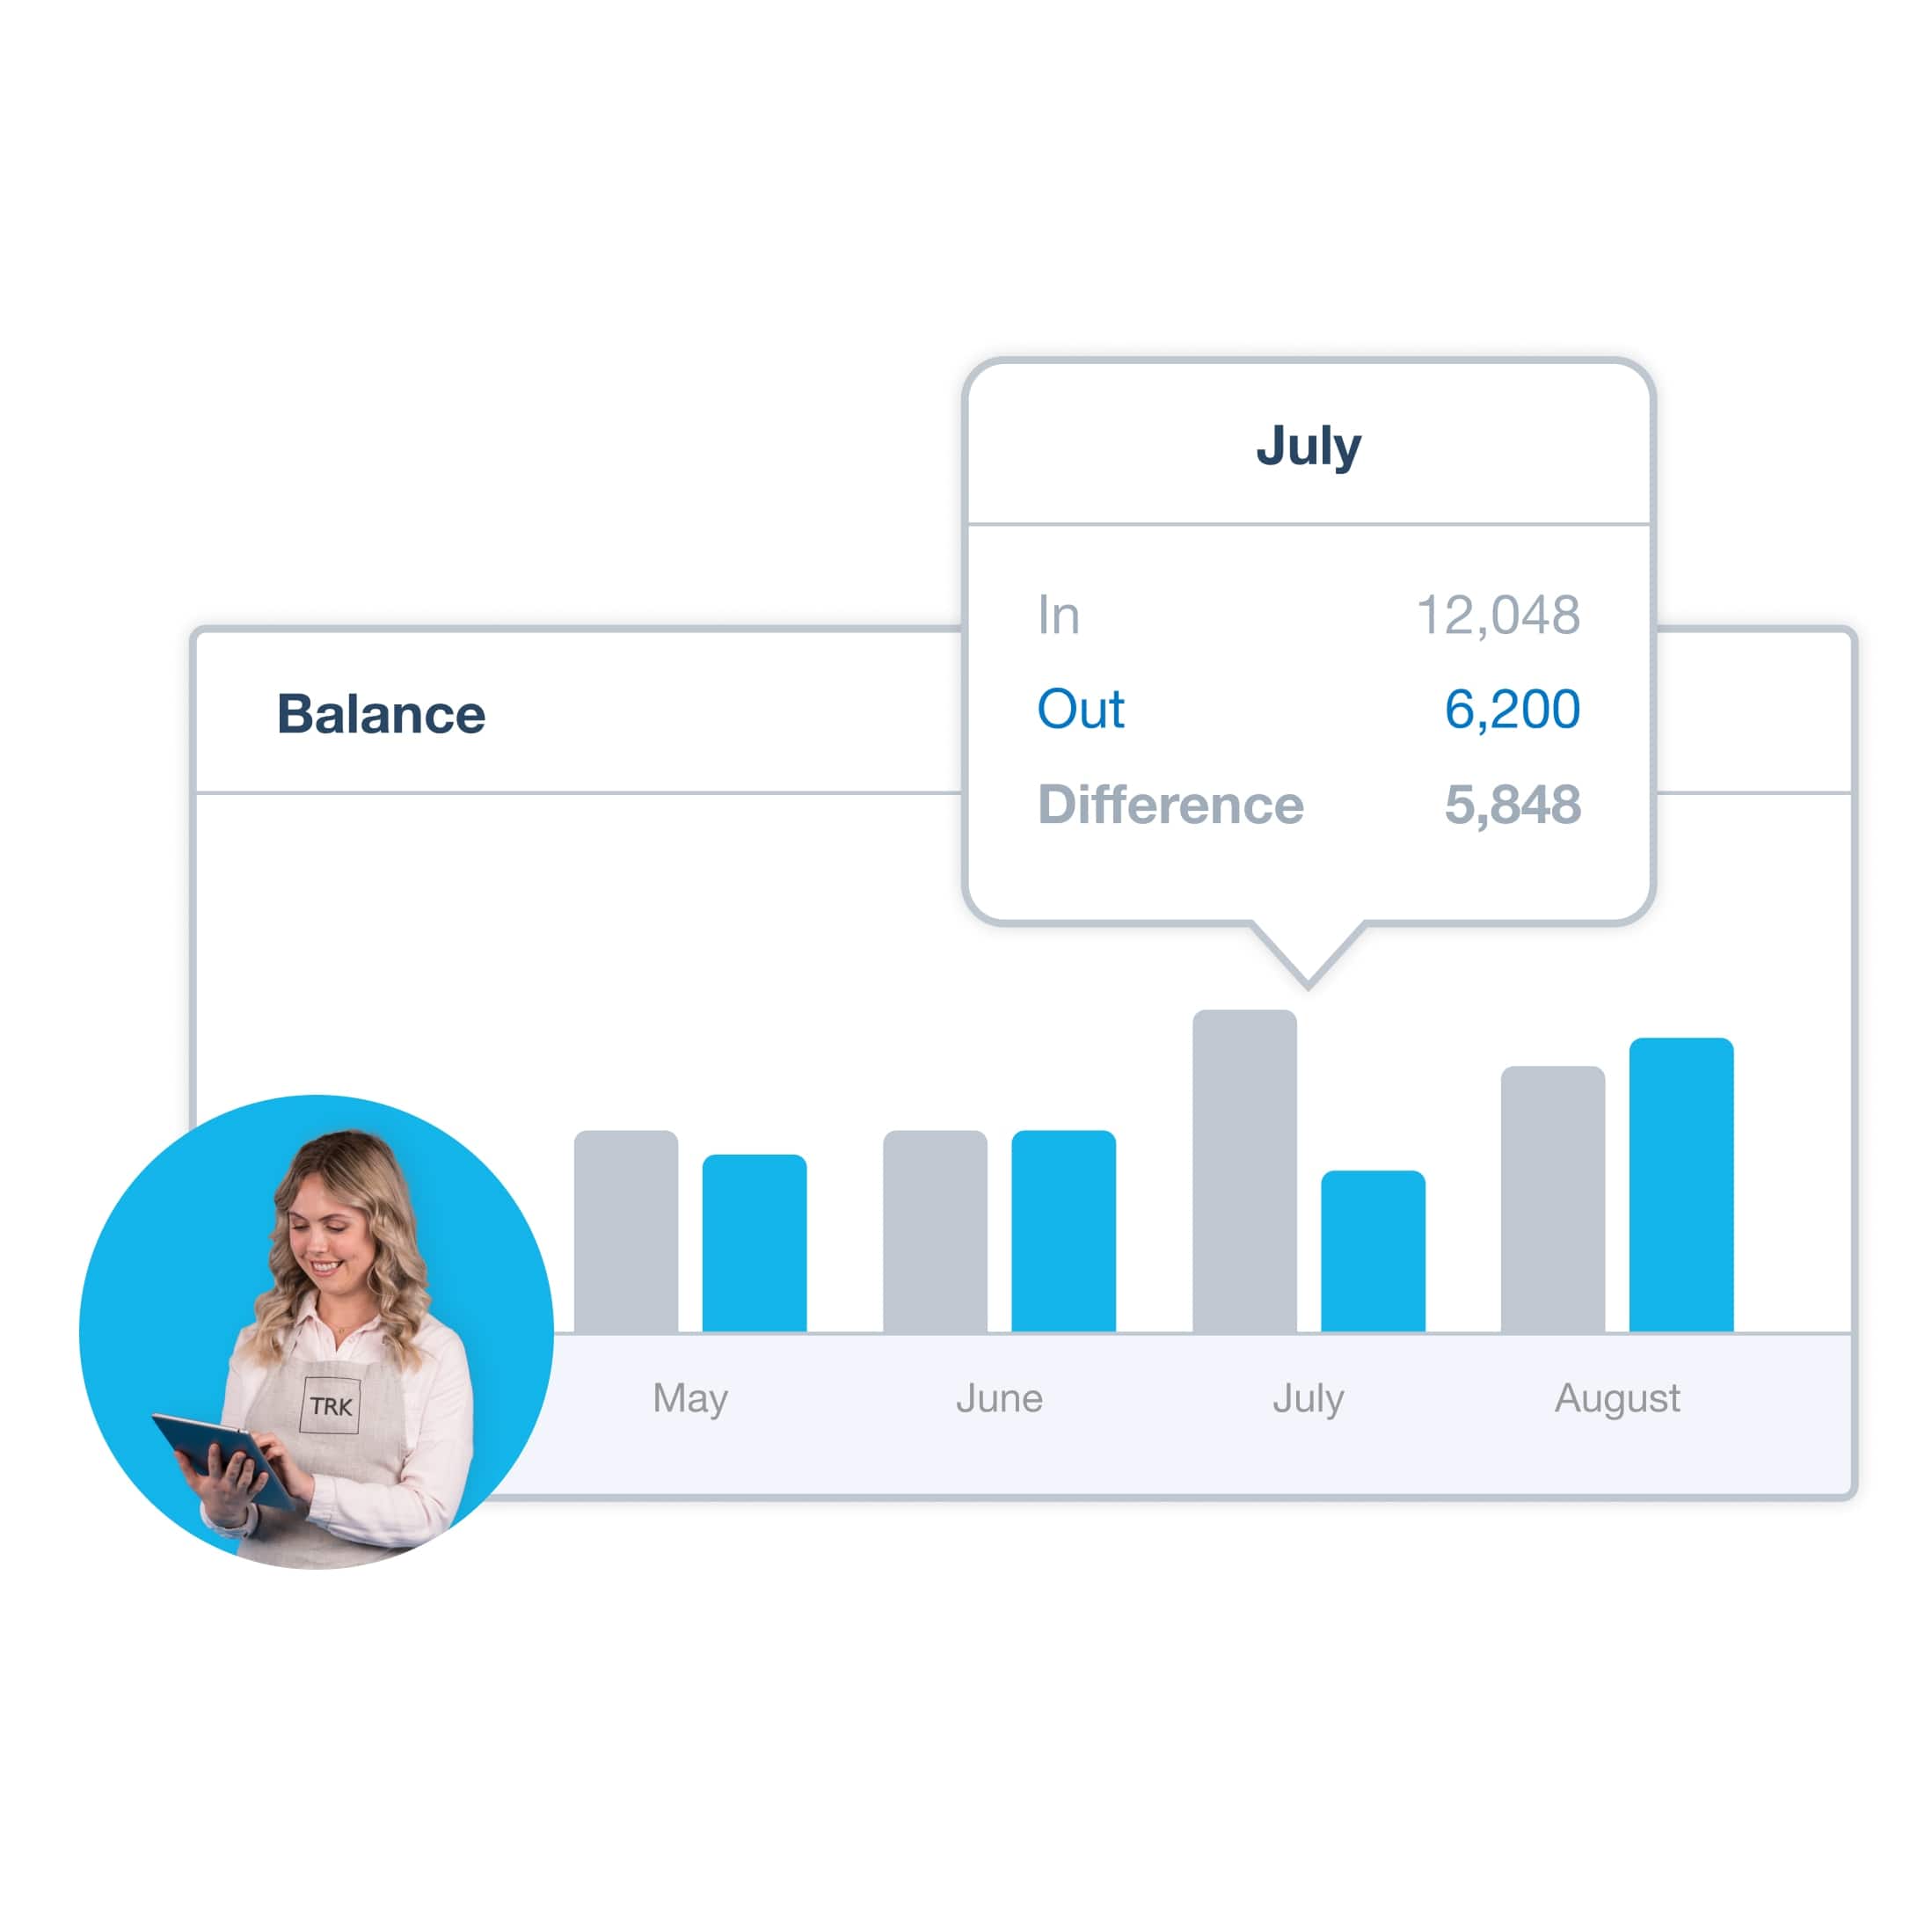 The Xero dashboard shows a bar chart of monthly totals for cash coming in and going out.